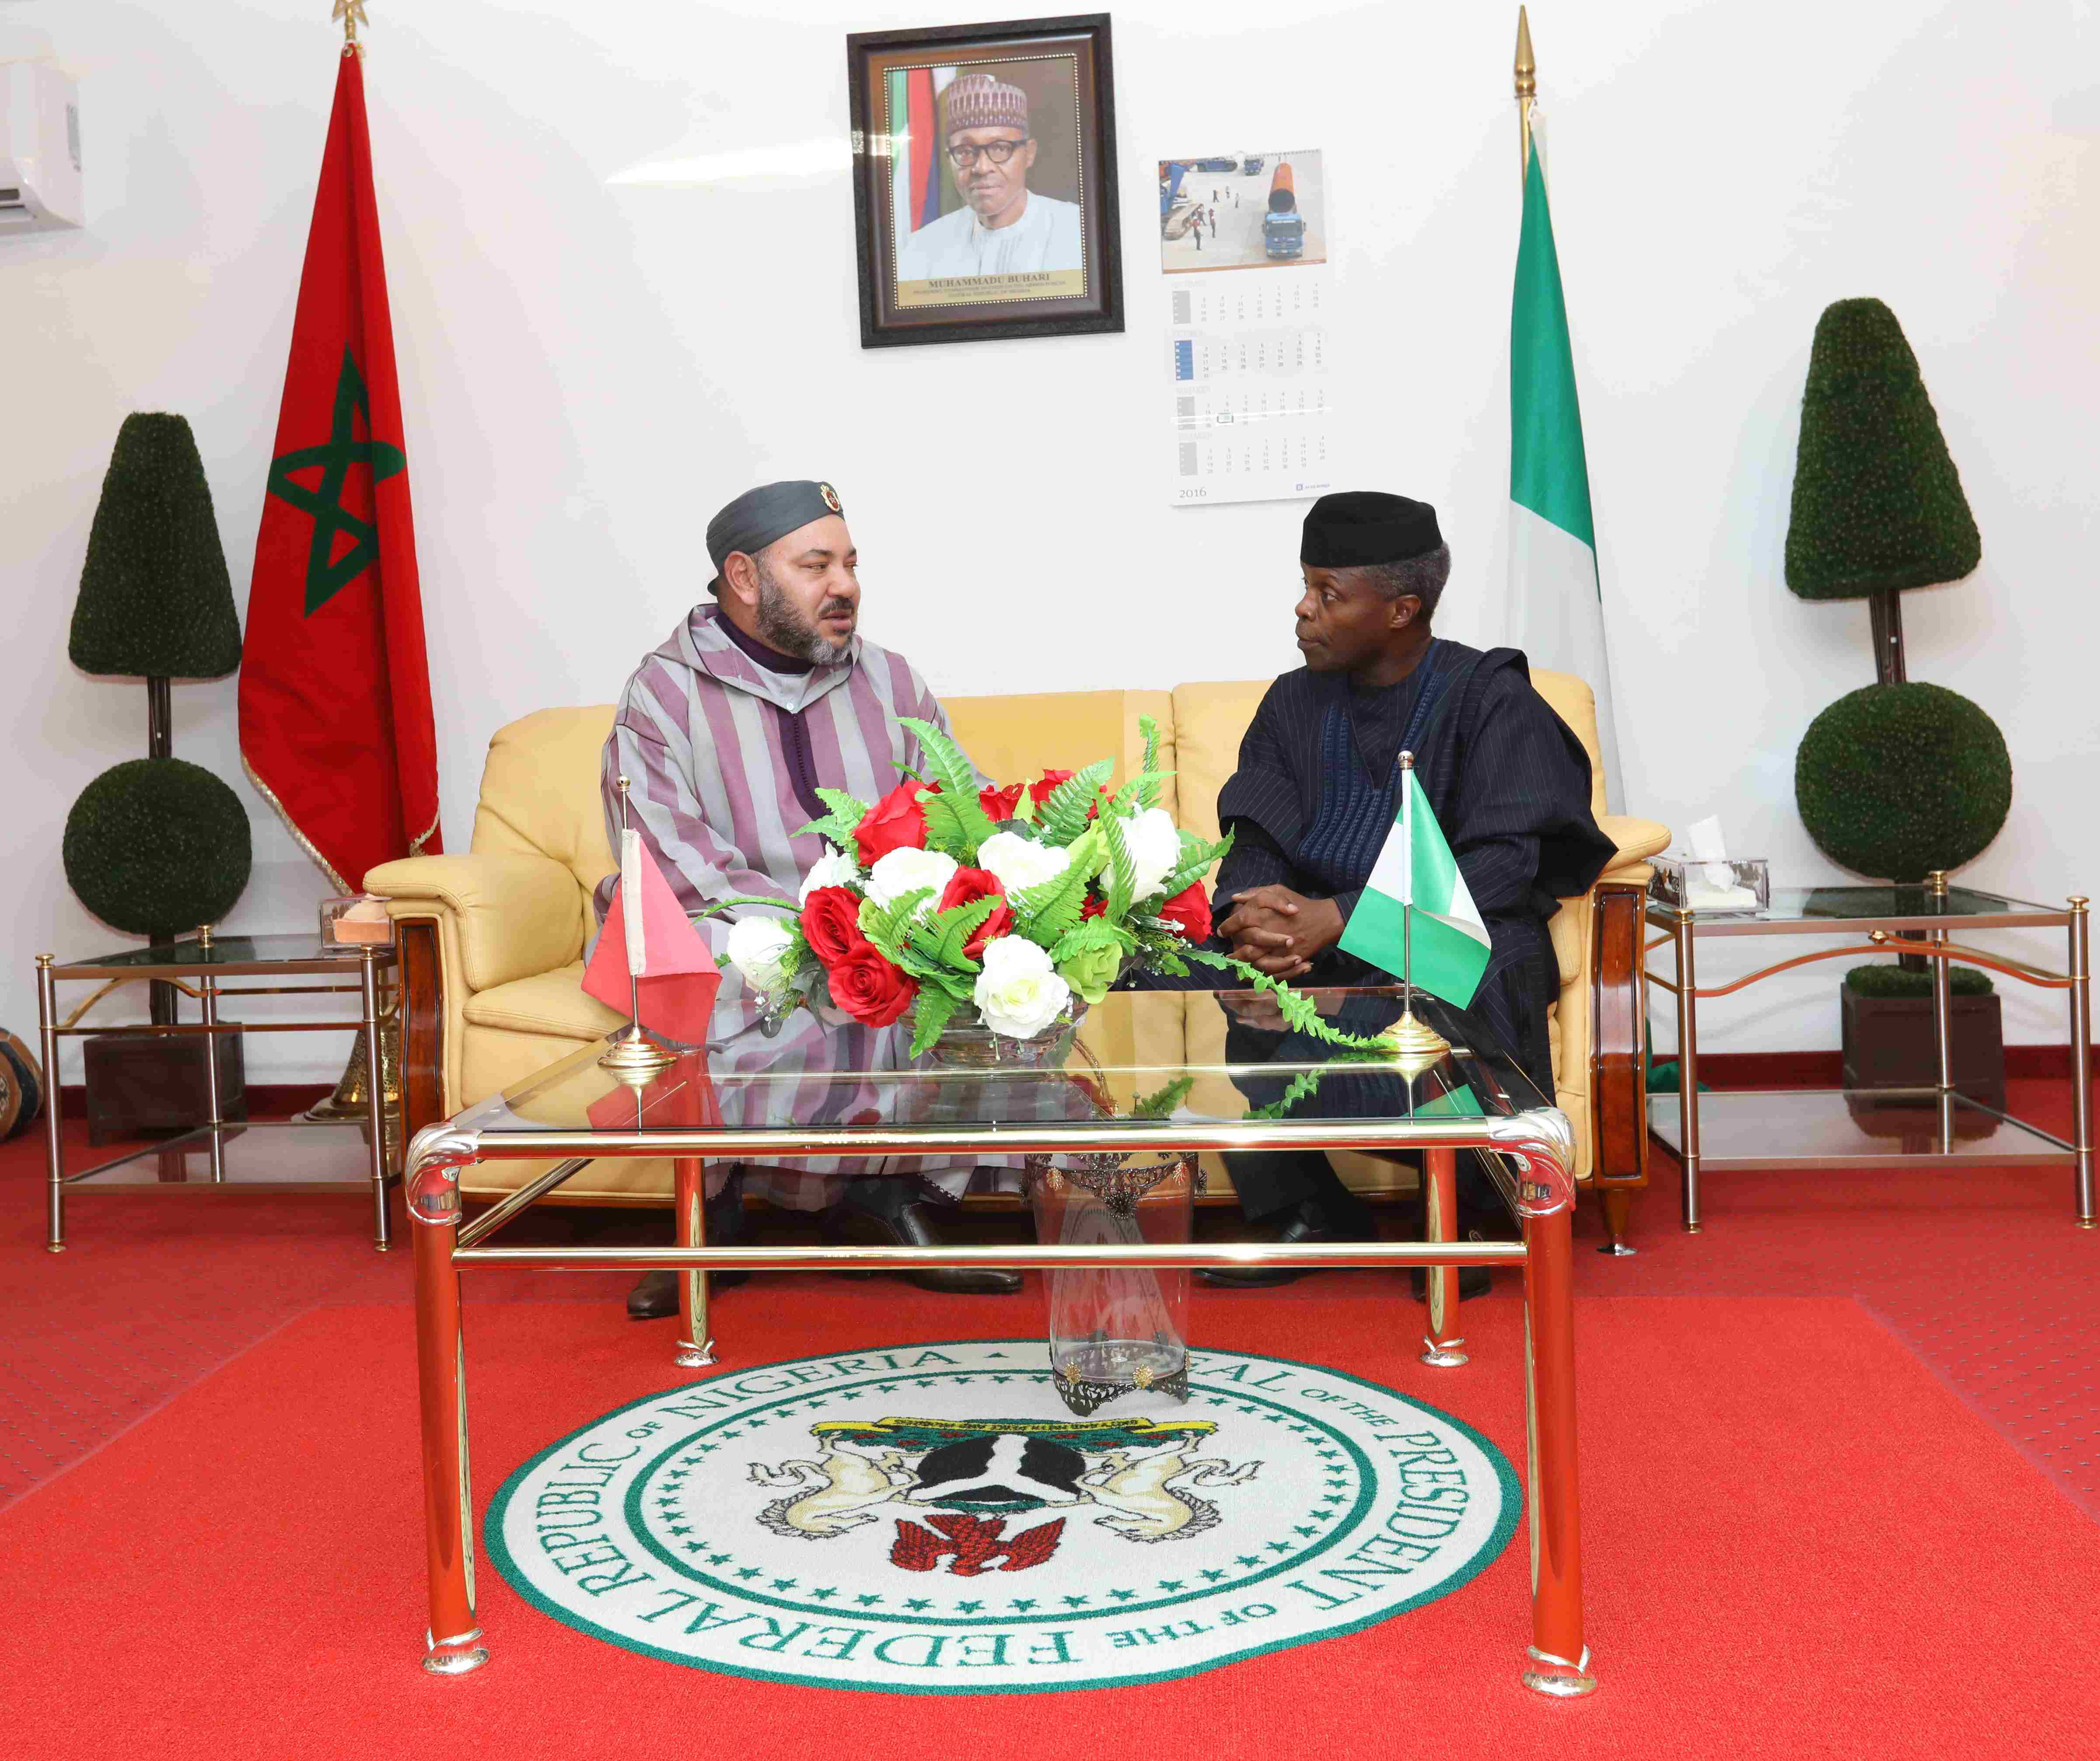 VP Osinbajo Welcomes His Majesty, King Mohammed VI, King Of Morocco To Nigeria On 01/12/2016